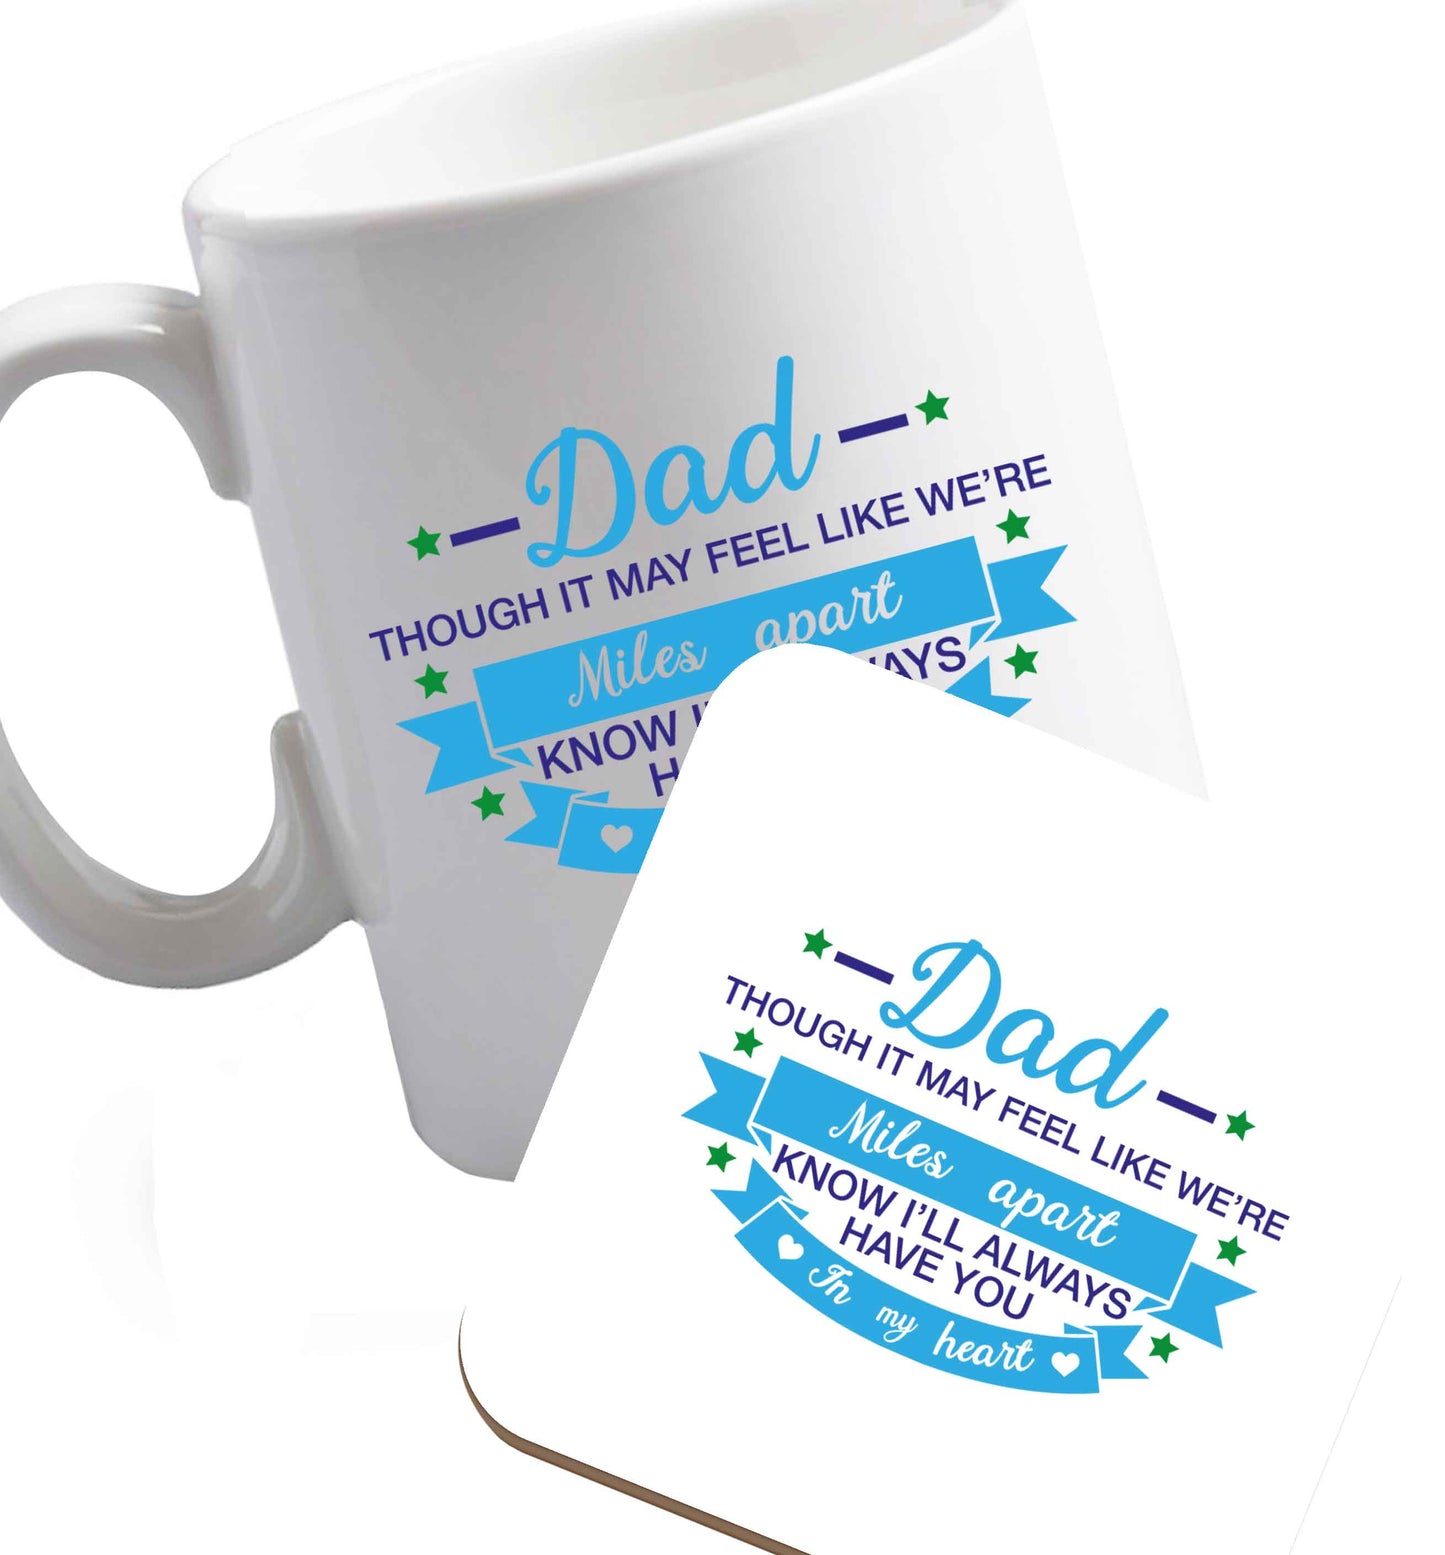 10 oz Dad though it may feel like we're miles apart know I'll always have you in my heart ceramic mug and coaster set right handed